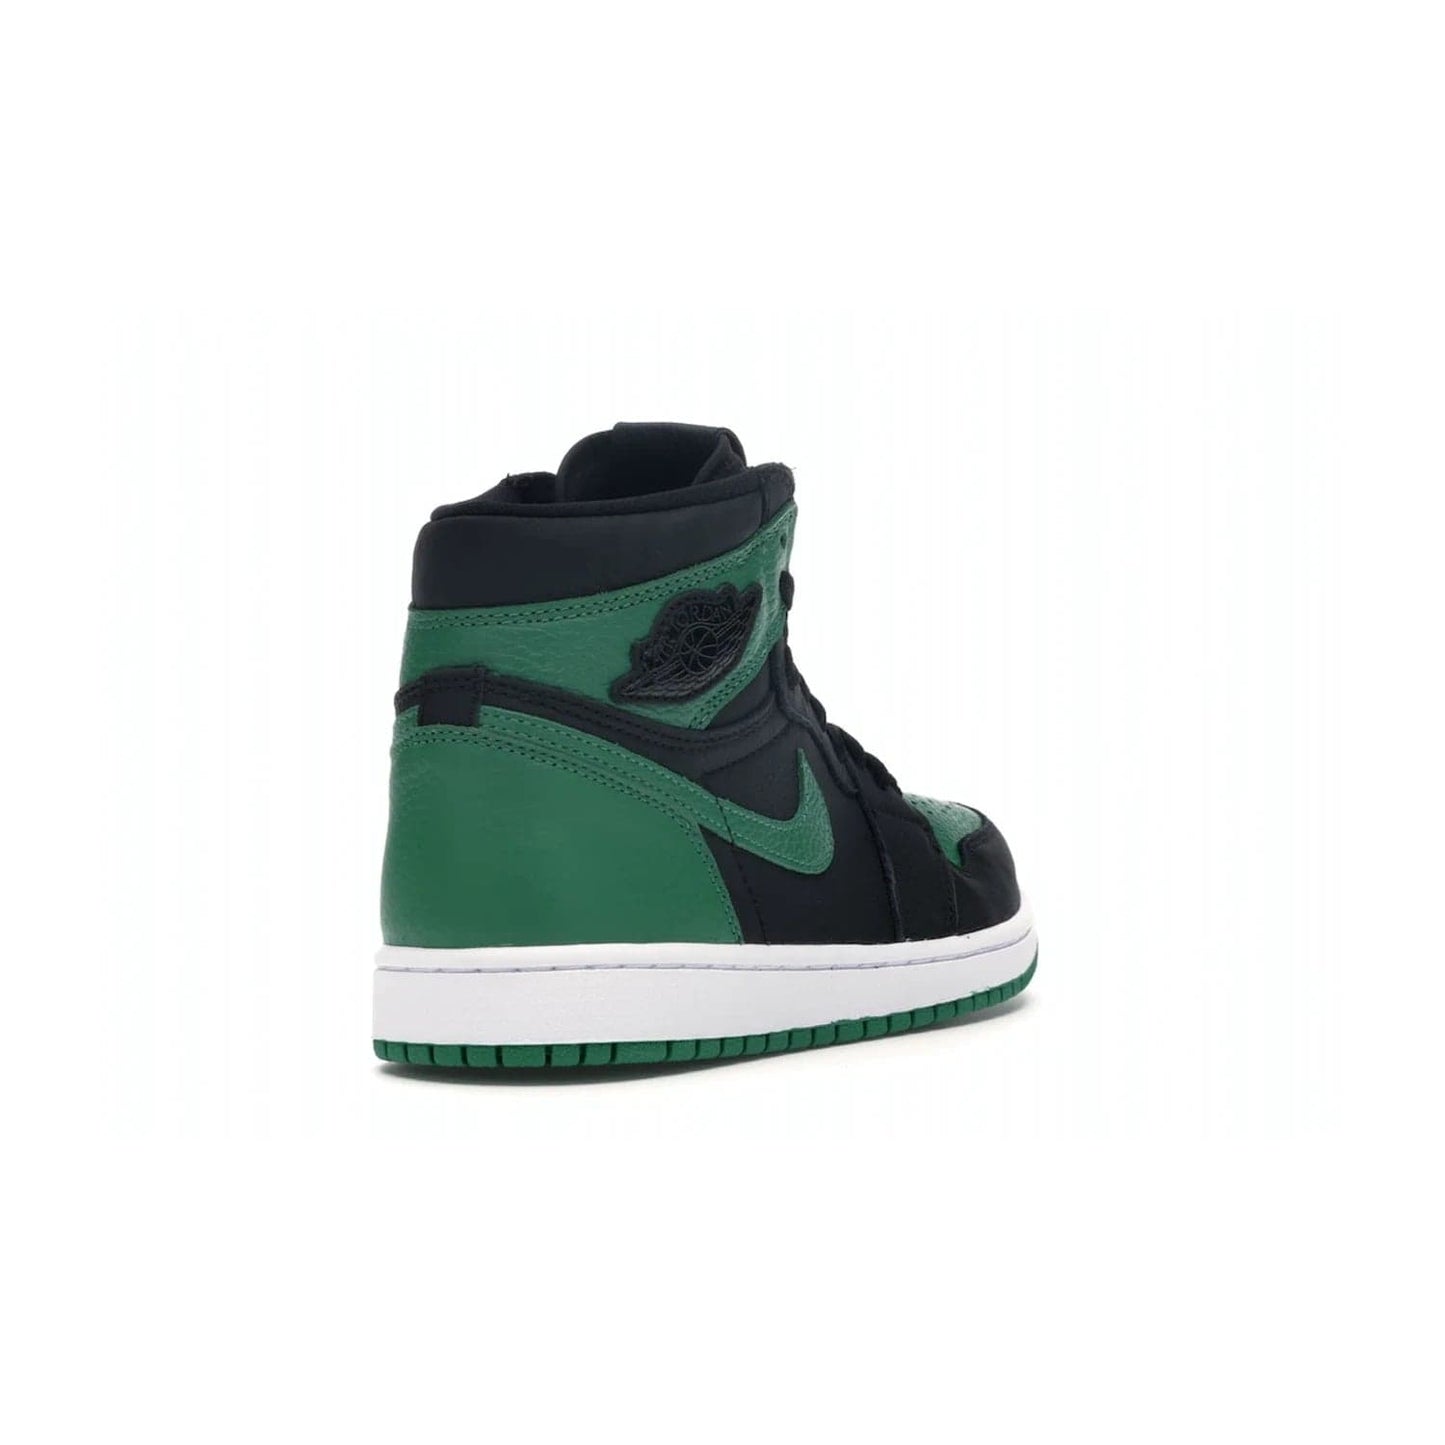 Jordan 1 Retro High Pine Green Black - Image 31 - Only at www.BallersClubKickz.com - Step into fresh style with the Jordan 1 Retro High Pine Green Black. Combining a black tumbled leather upper with green leather overlays, this sneaker features a Gym Red embroidered tongue tag, sail midsole, and pine green outsole for iconic style with a unique twist.